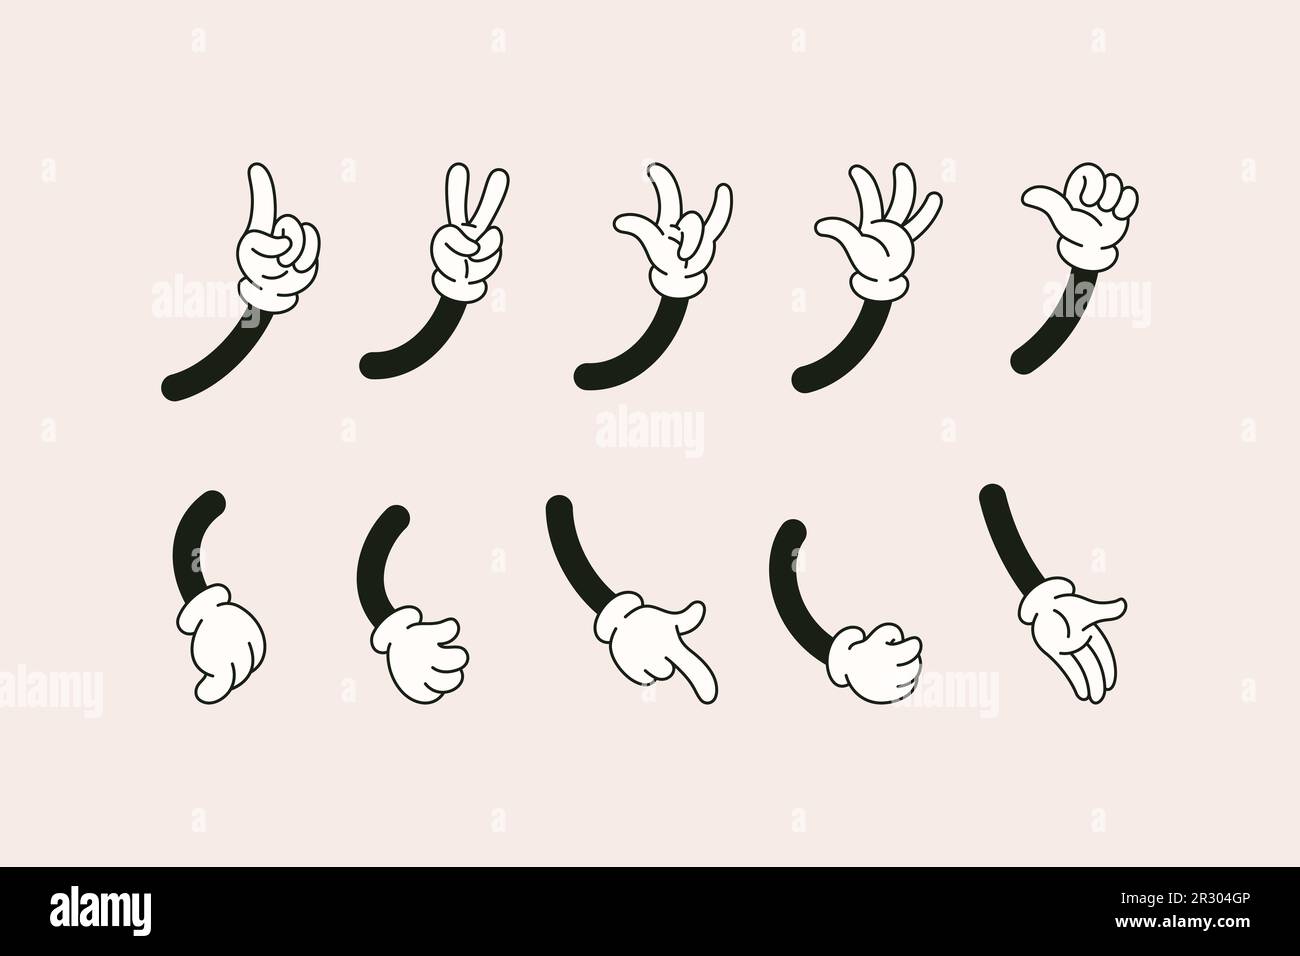 Retro Cartoon Hands Set in Different Gestures Showing Ok Sign, Pointing Fingers, Thumb Up, Rock sign, High Five. Vector Comic Arms in Gloves in 1930 S Stock Vector